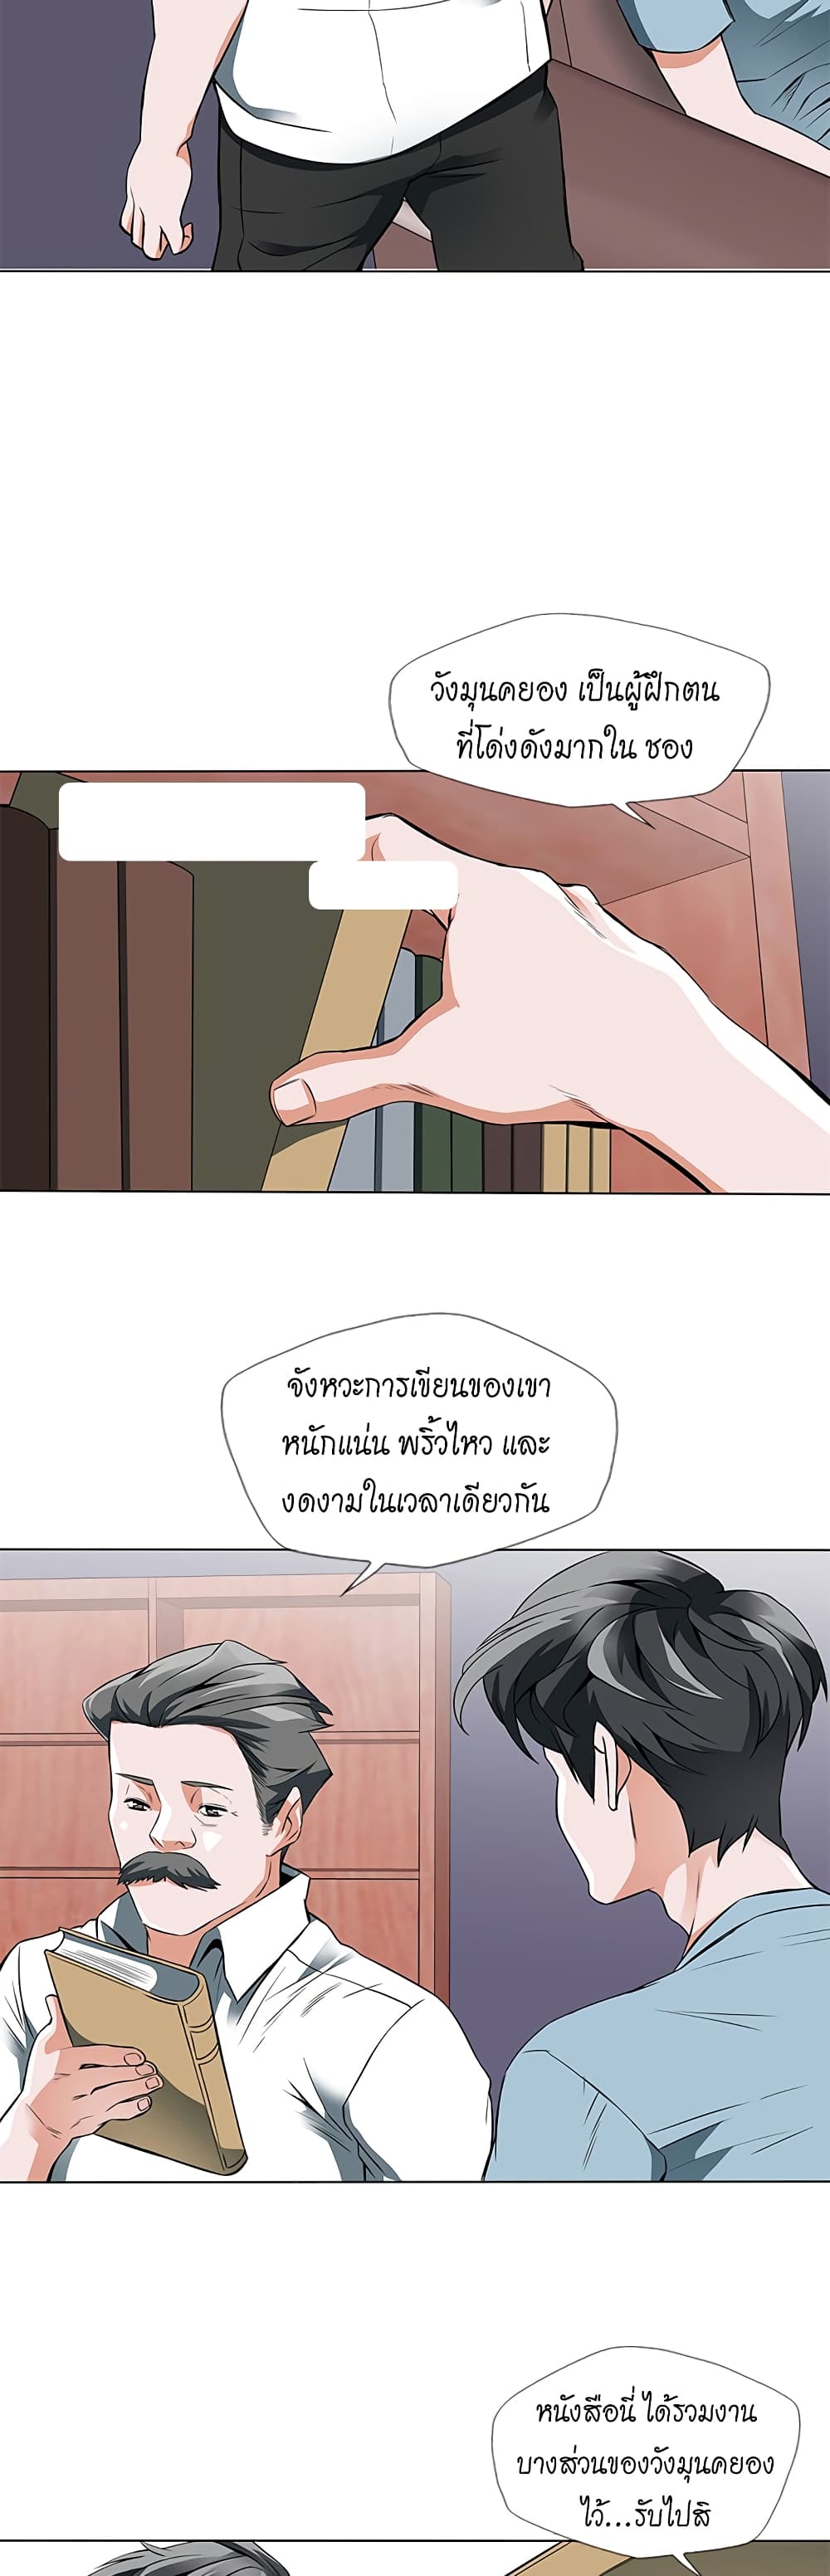 I Stack Experience Through Reading Books - หน้า 10